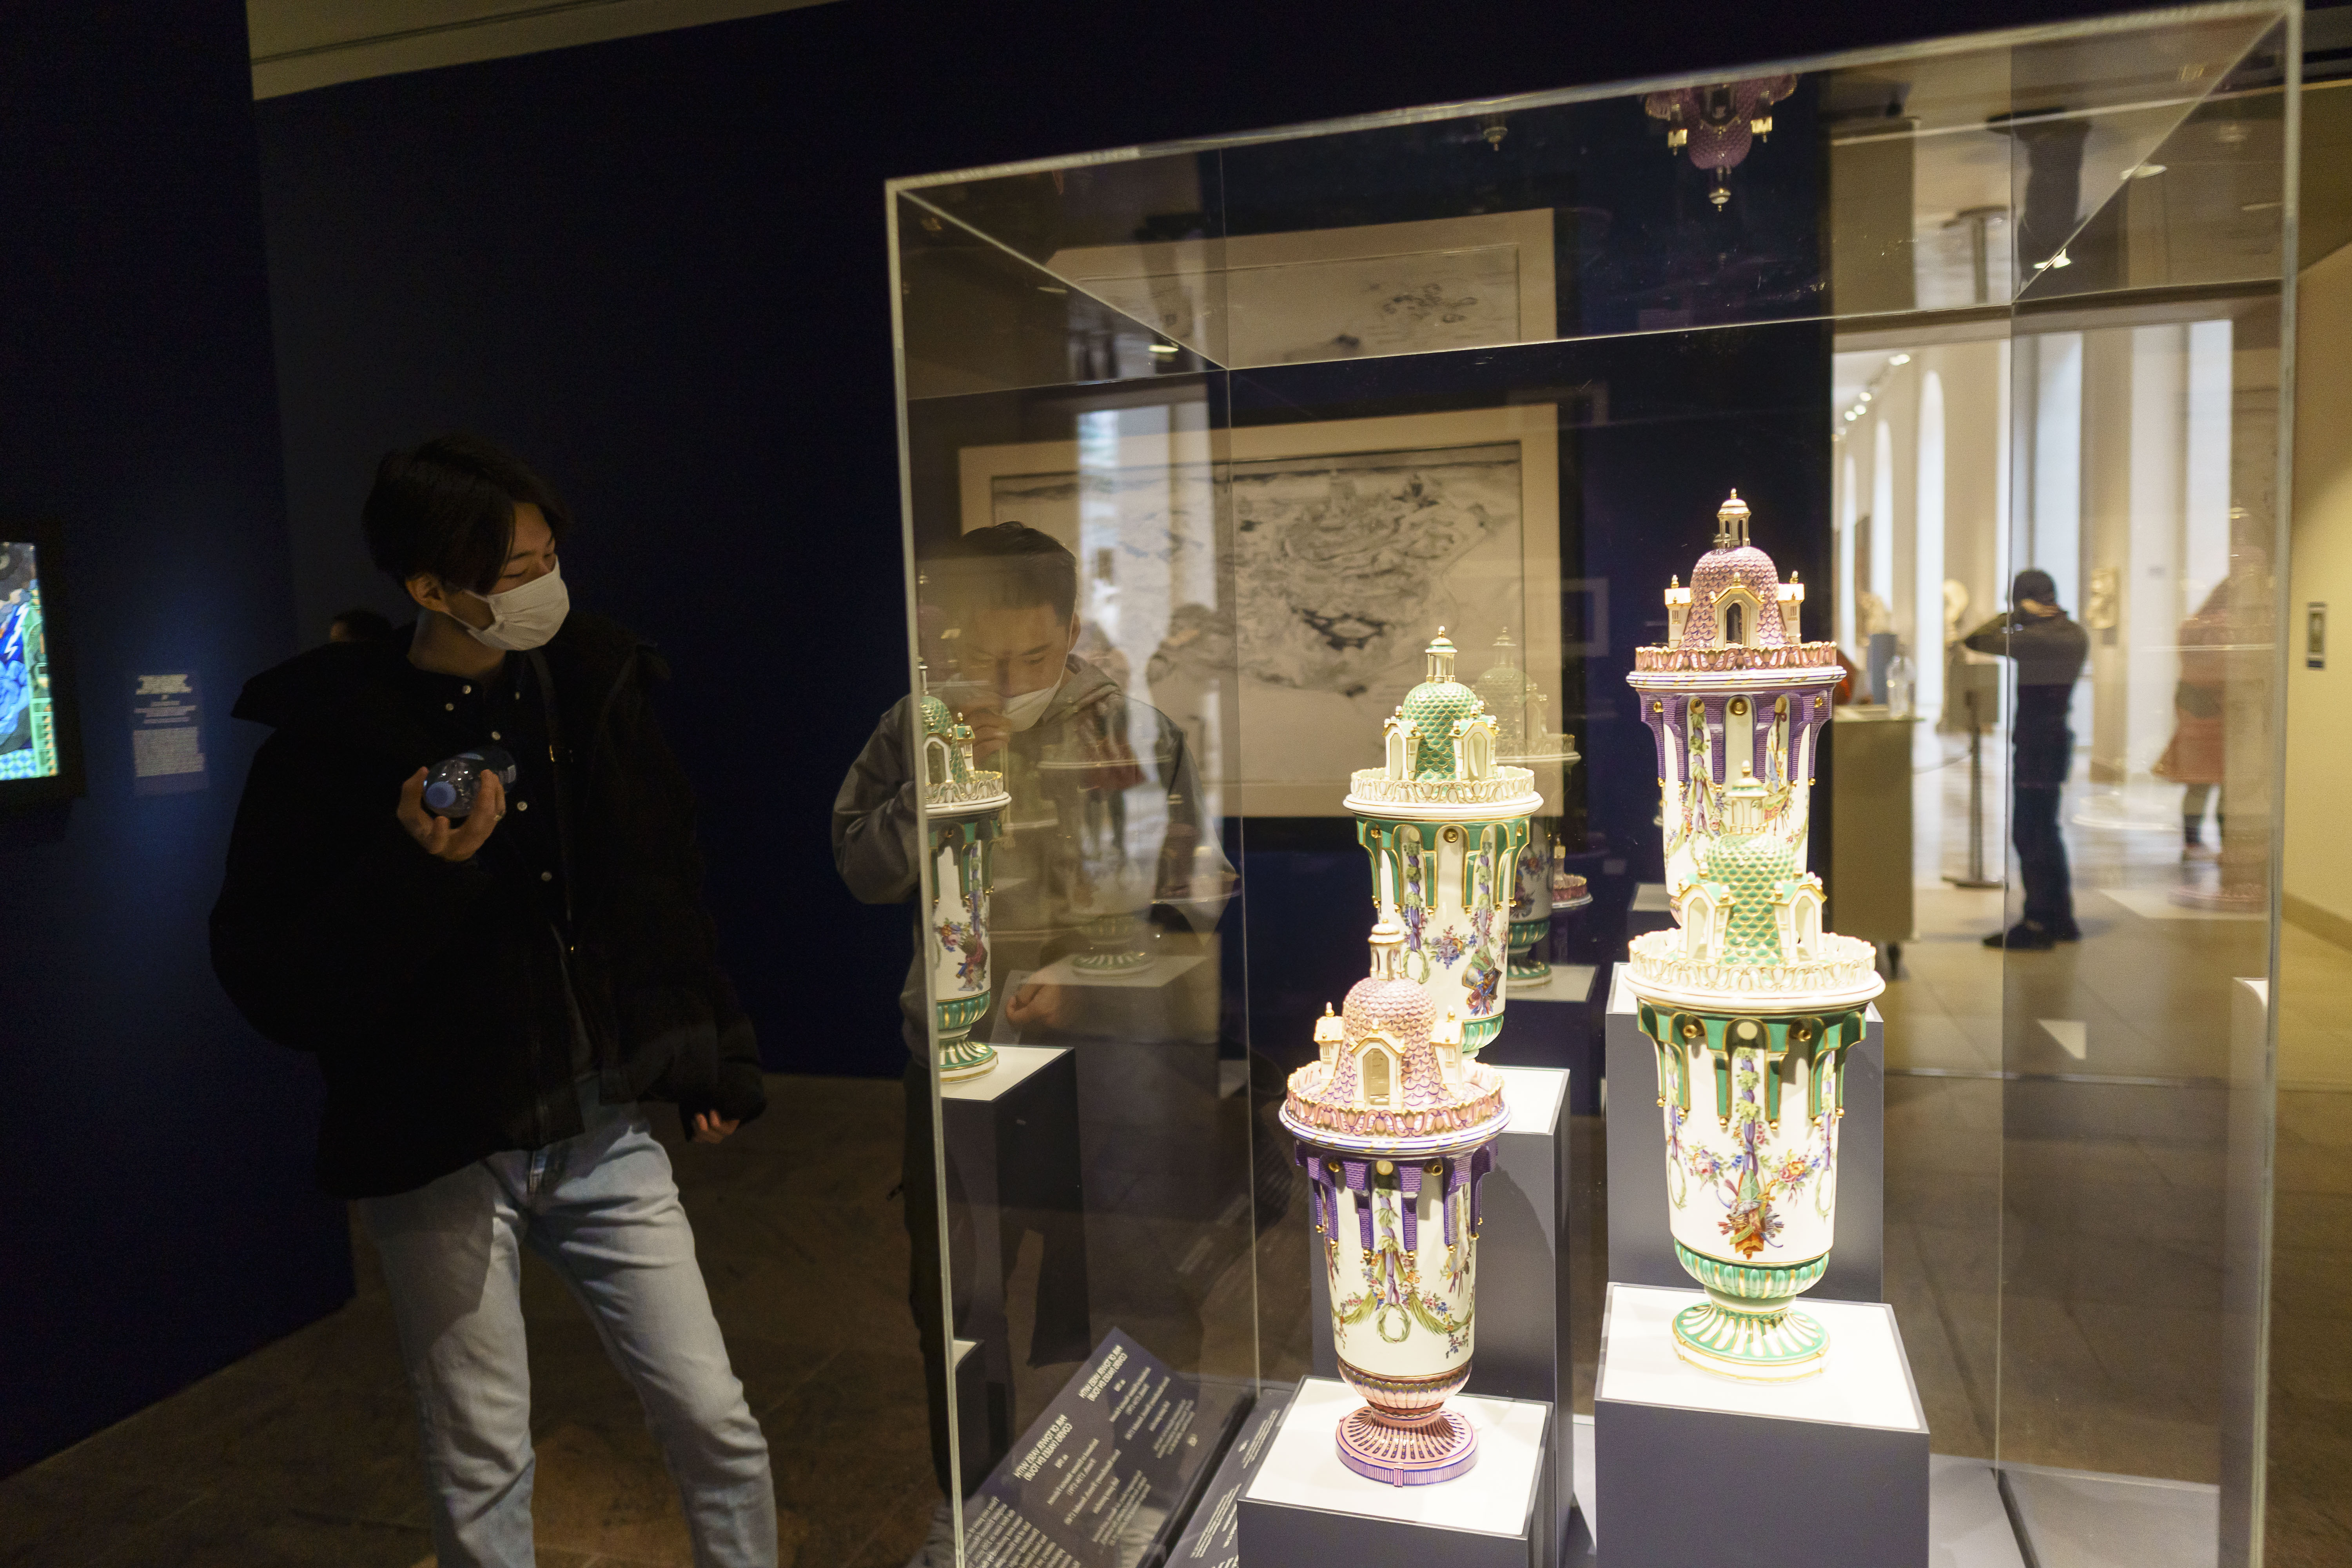 These four Rococo vases, though not a direct influence, have elements that resemble Disney castles.